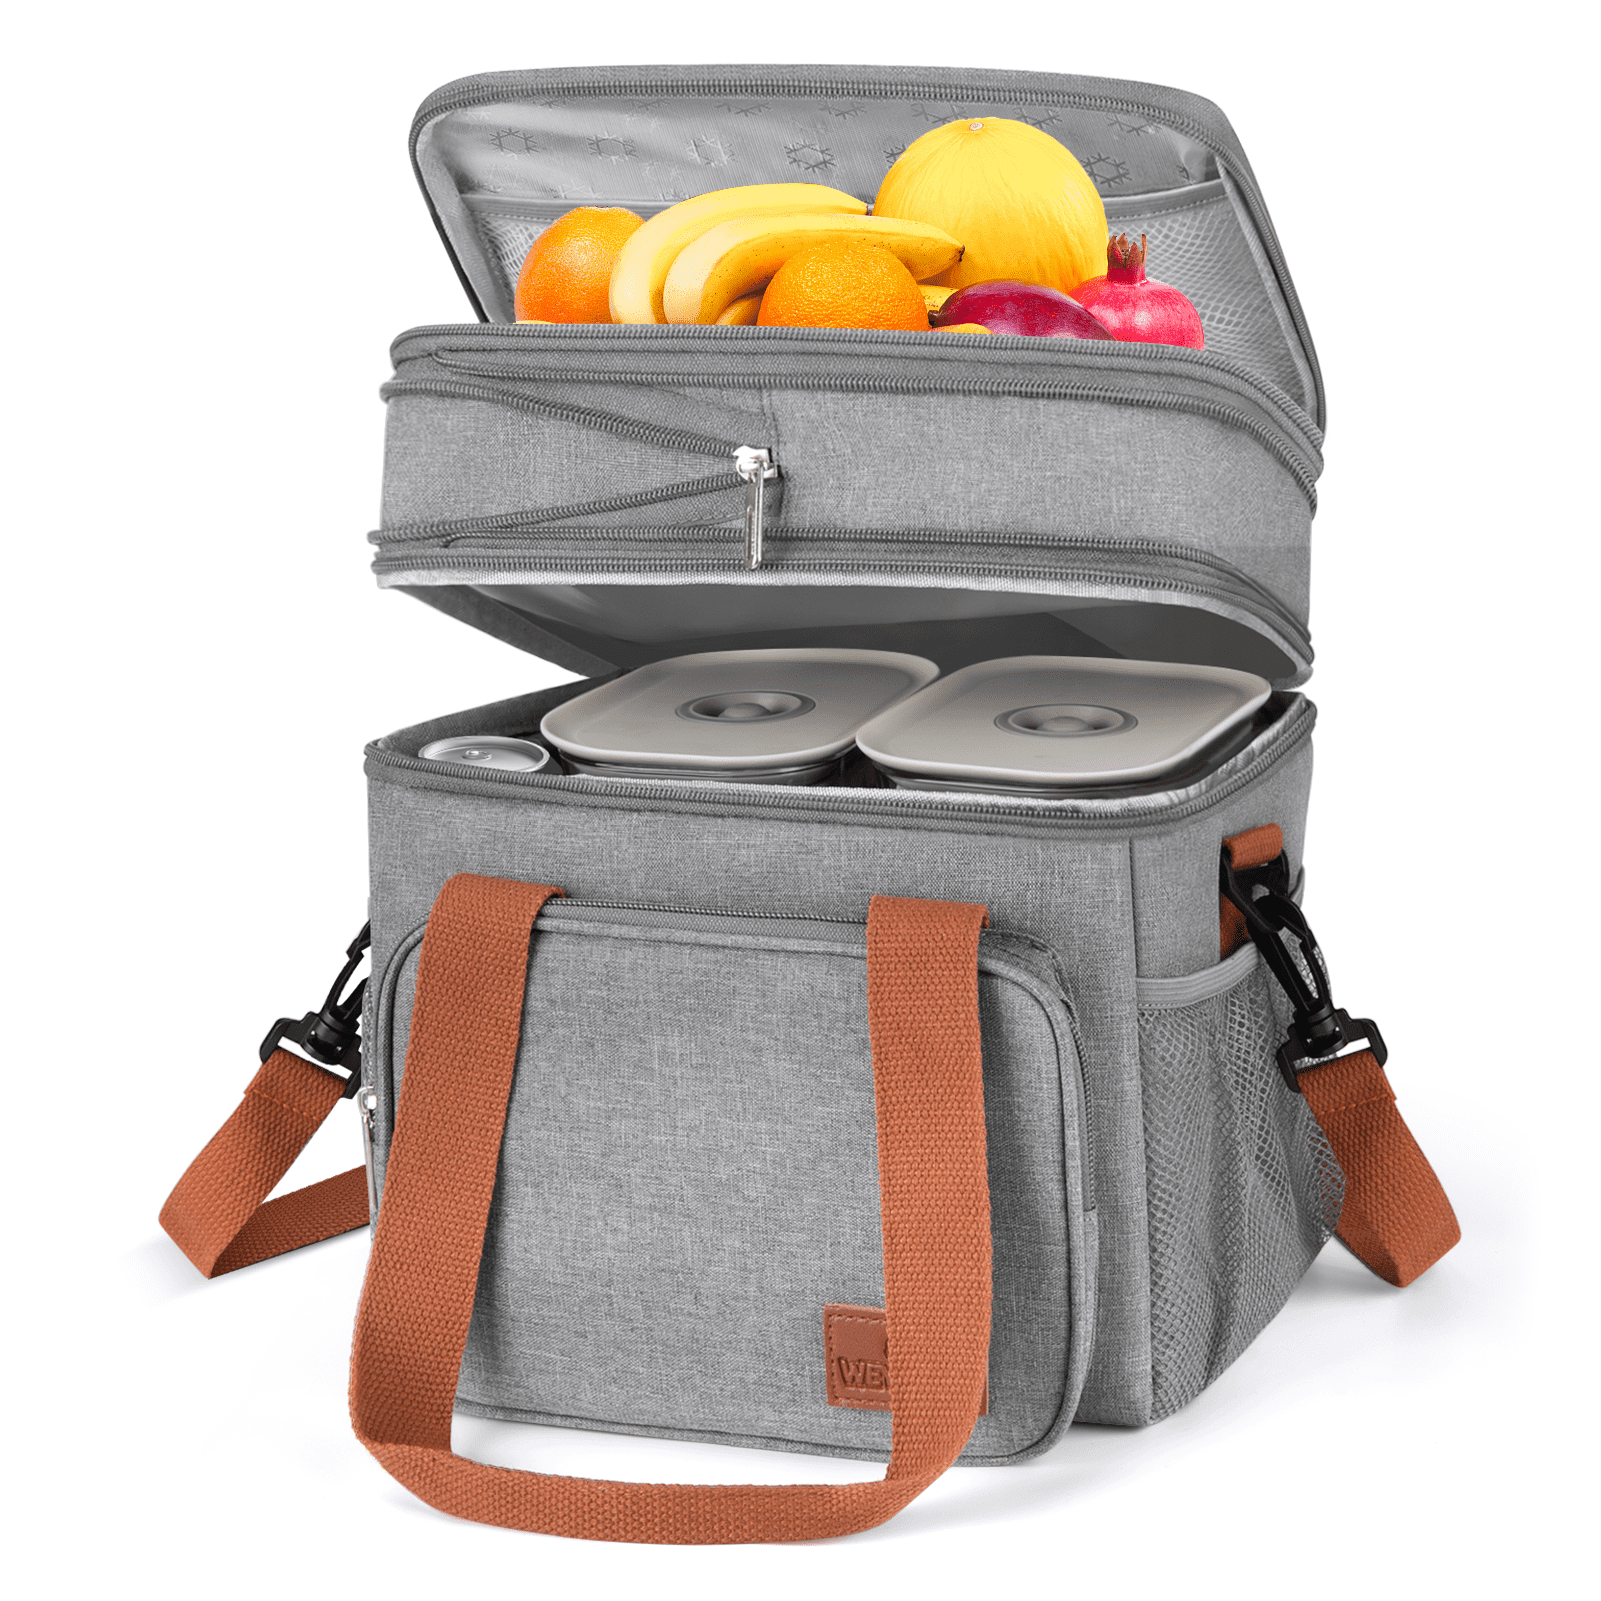 Maelstrom lunch bag women/men,reusable lunch box for men,insulated lunch  cooler bag for adults kids,collapsible leakproof lunch tote ba